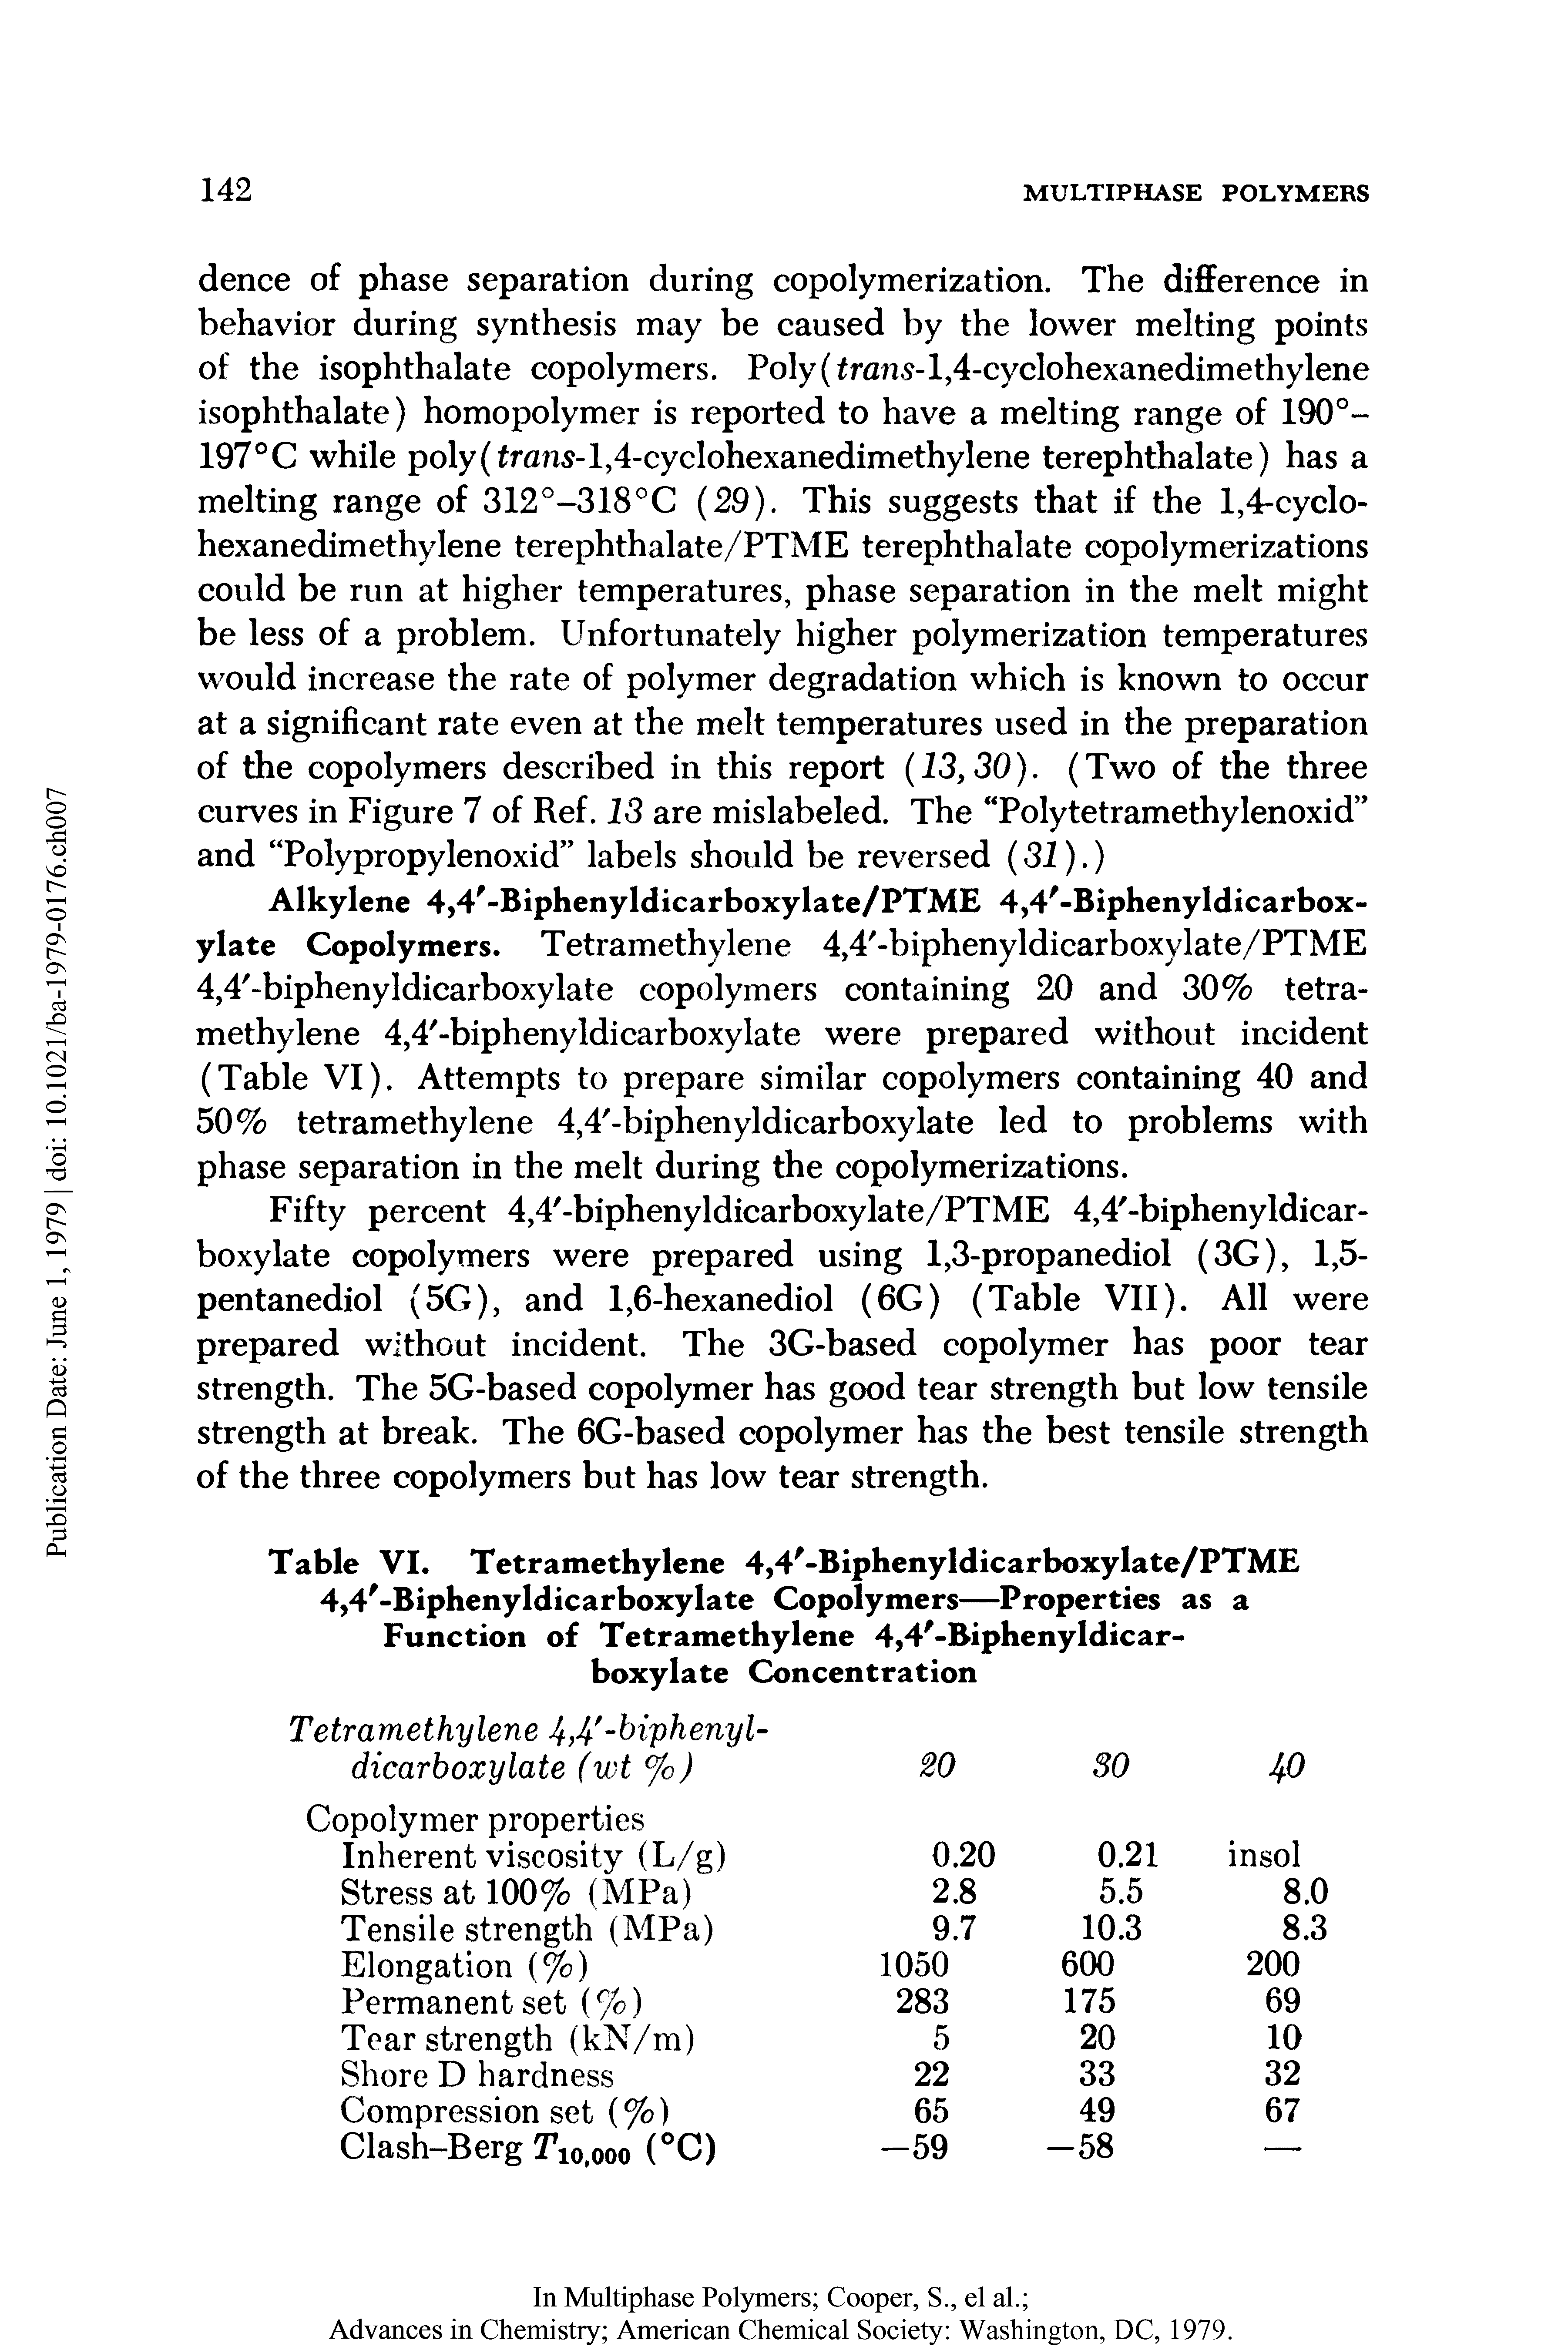 Table VI. Tetramethylene 4,4 -Biphenyldicarboxylate/PTME 4,4 -Biphenyldicarboxylate Copolymers—Properties as a Function of Tetramethylene 4,4 -Biphenyldicar-boxylate Concentration...